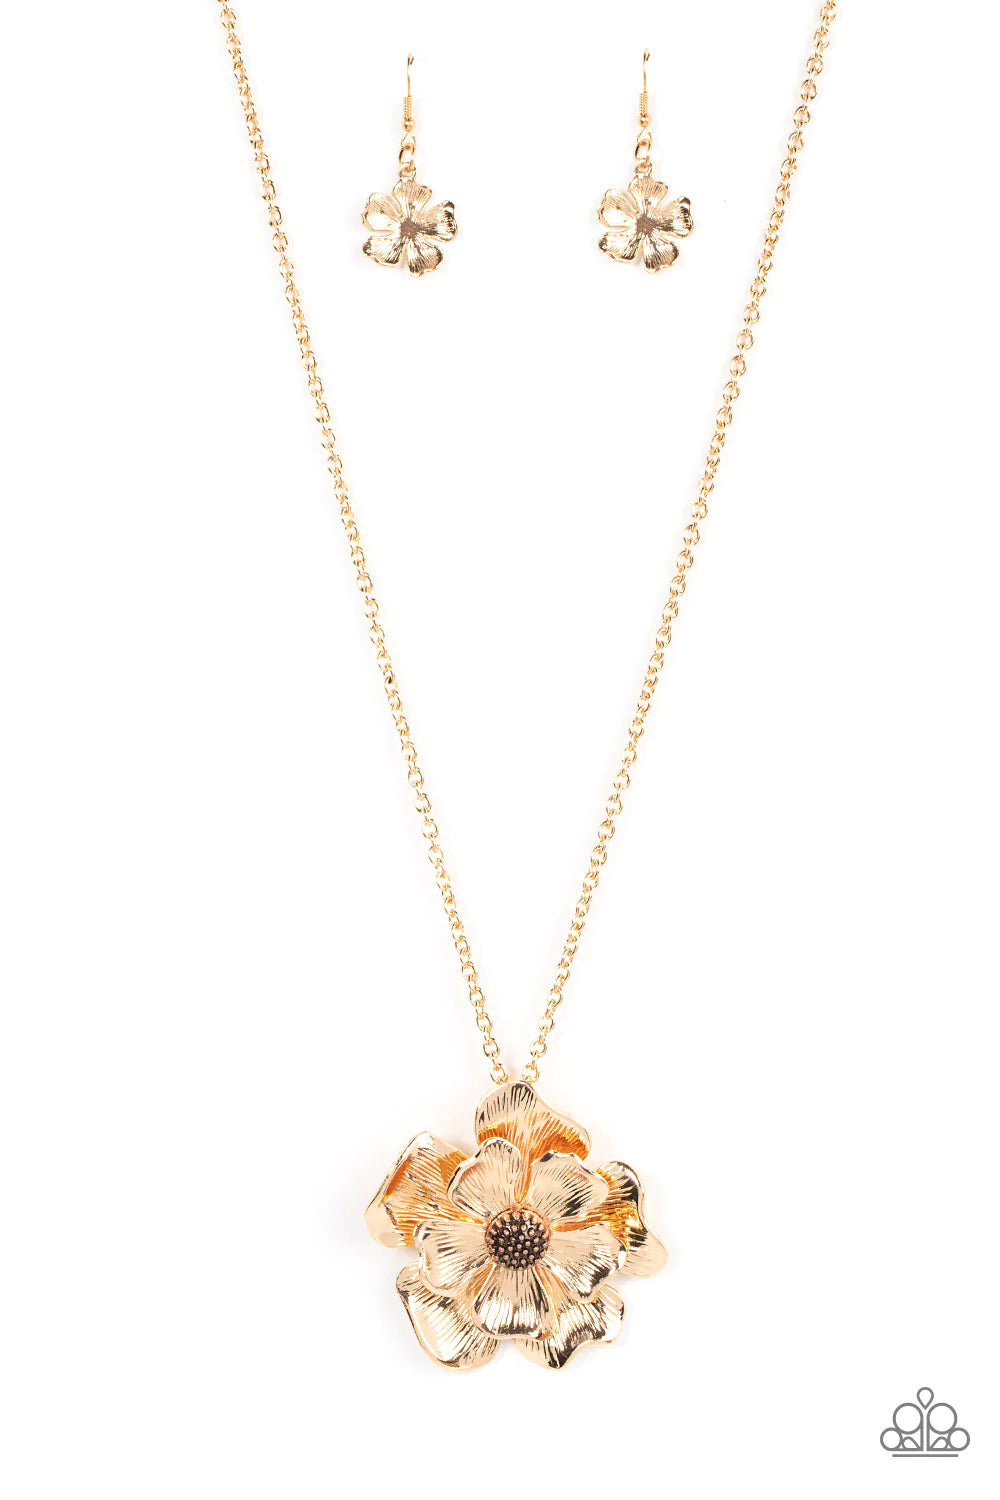 Paparazzi Accessories Homegrown Glamour - Gold Layers of scalloped and textured gold petals bloom from a studded copper beaded center. The oversized flower swings from the bottom of an extended gold chain, resulting in an eye-catching floral pendant. Feat